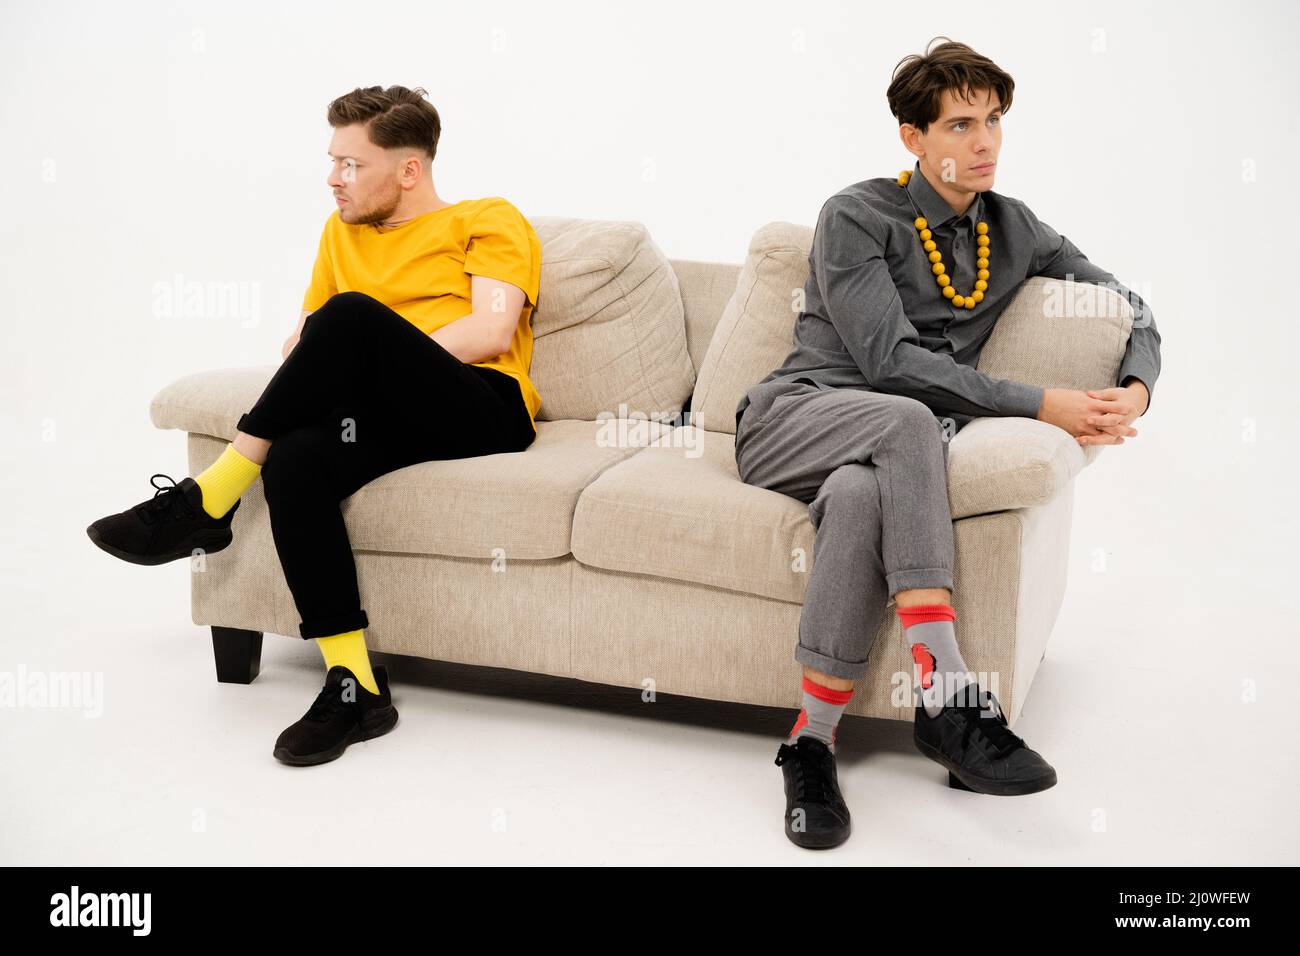 Two Friends Quarreled and Sat on Opposite Sides of the Sofa. Men are in a Quarrel and sit on the Couch at a Distance from Each O Stock Photo